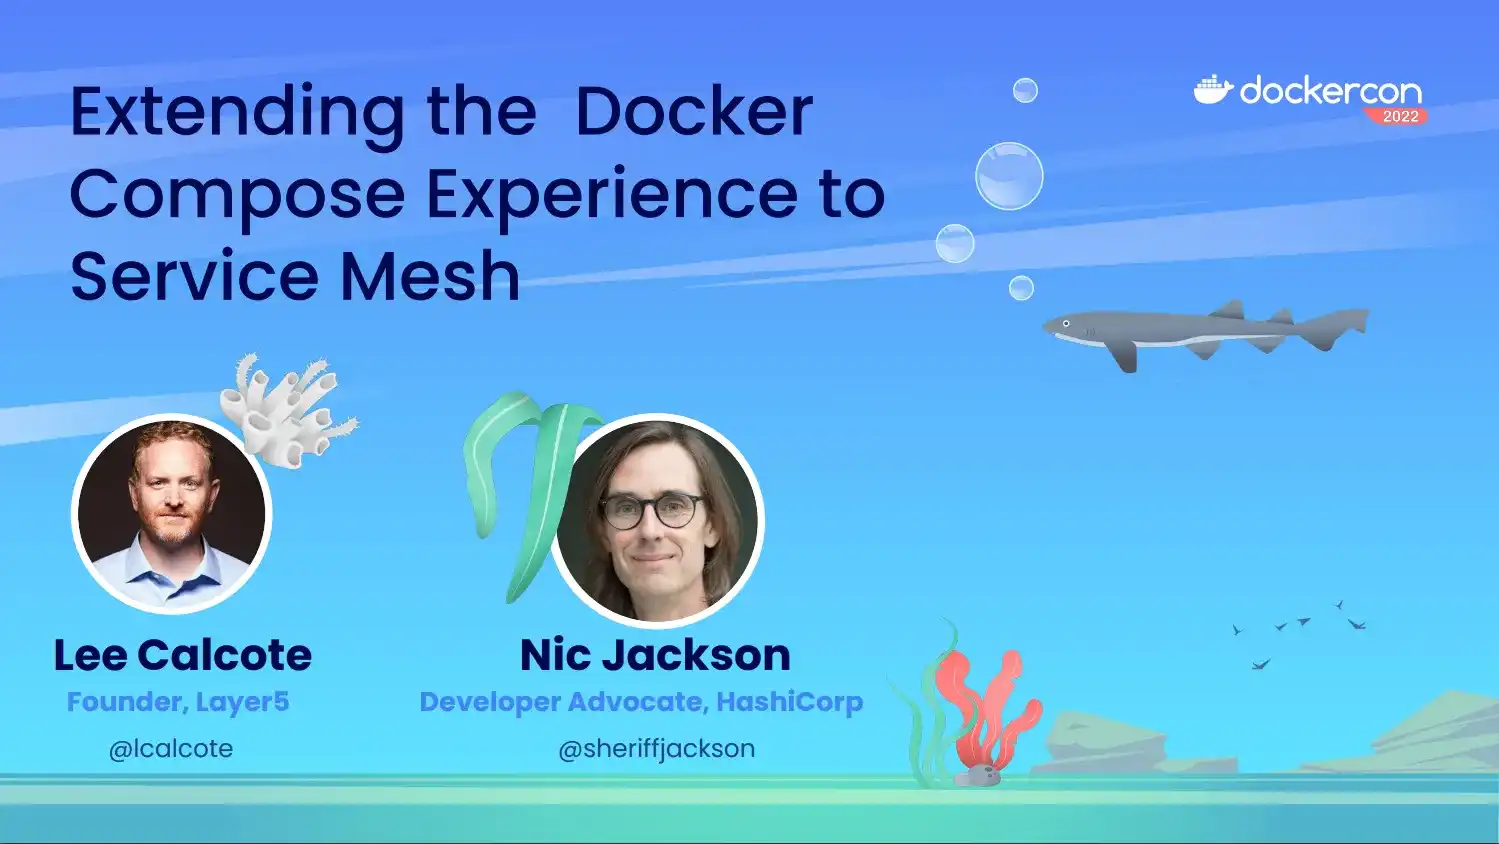 Extending the Docker Compose Experience to Service Mesh